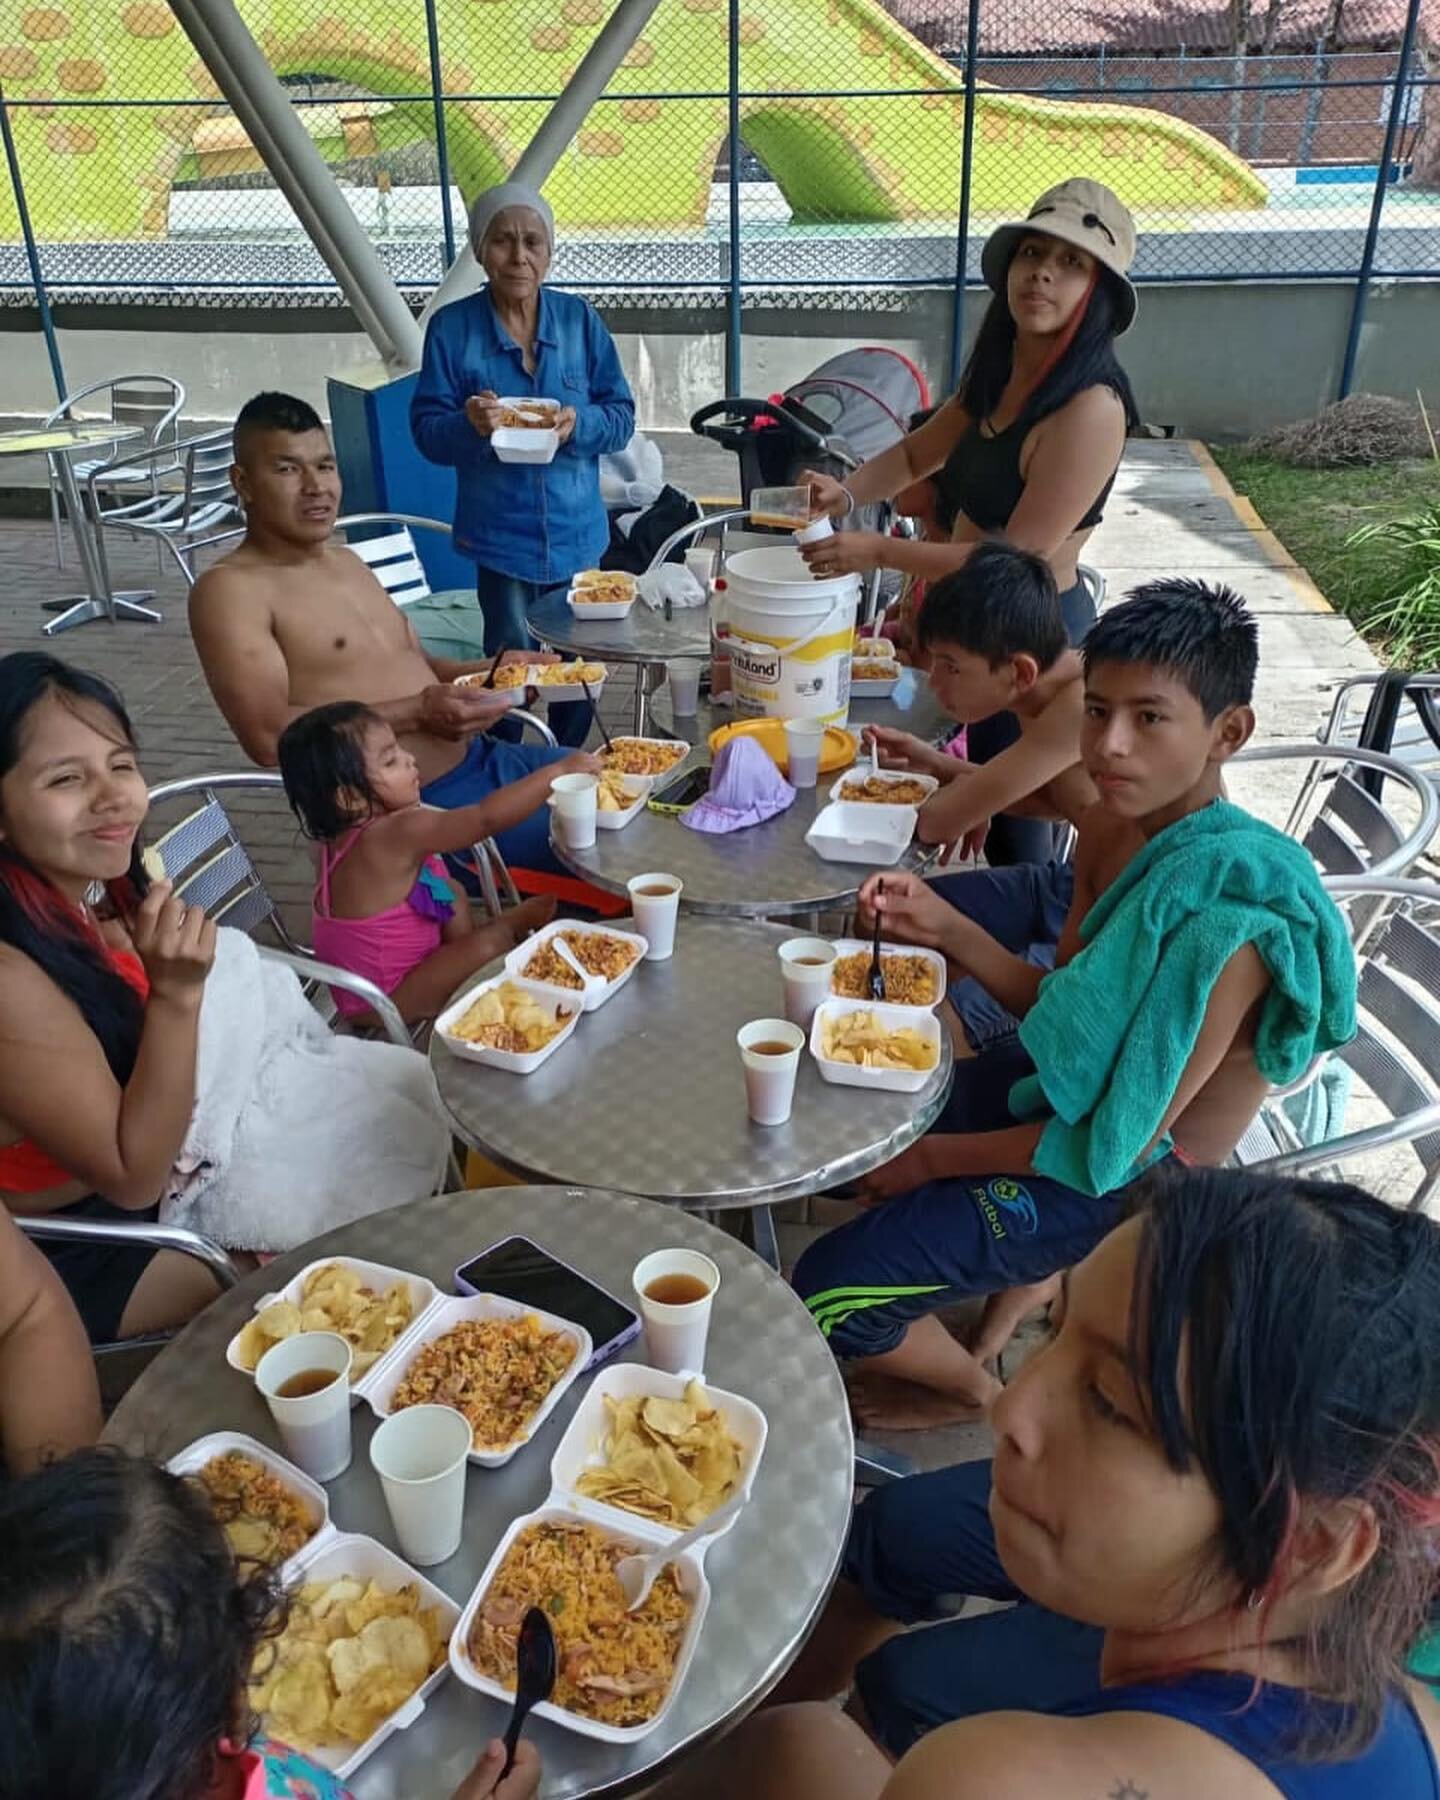 Our group in Pomona had there summer trip and they had a blast!! Swipe 👉 to see
Donate today @migotitadeamorinc 
#summertrip #soupkitchen #popayanco #colombia #helpingpeople #poorchildren #building #nonprofitorganization #donatetoday #supportus #bib